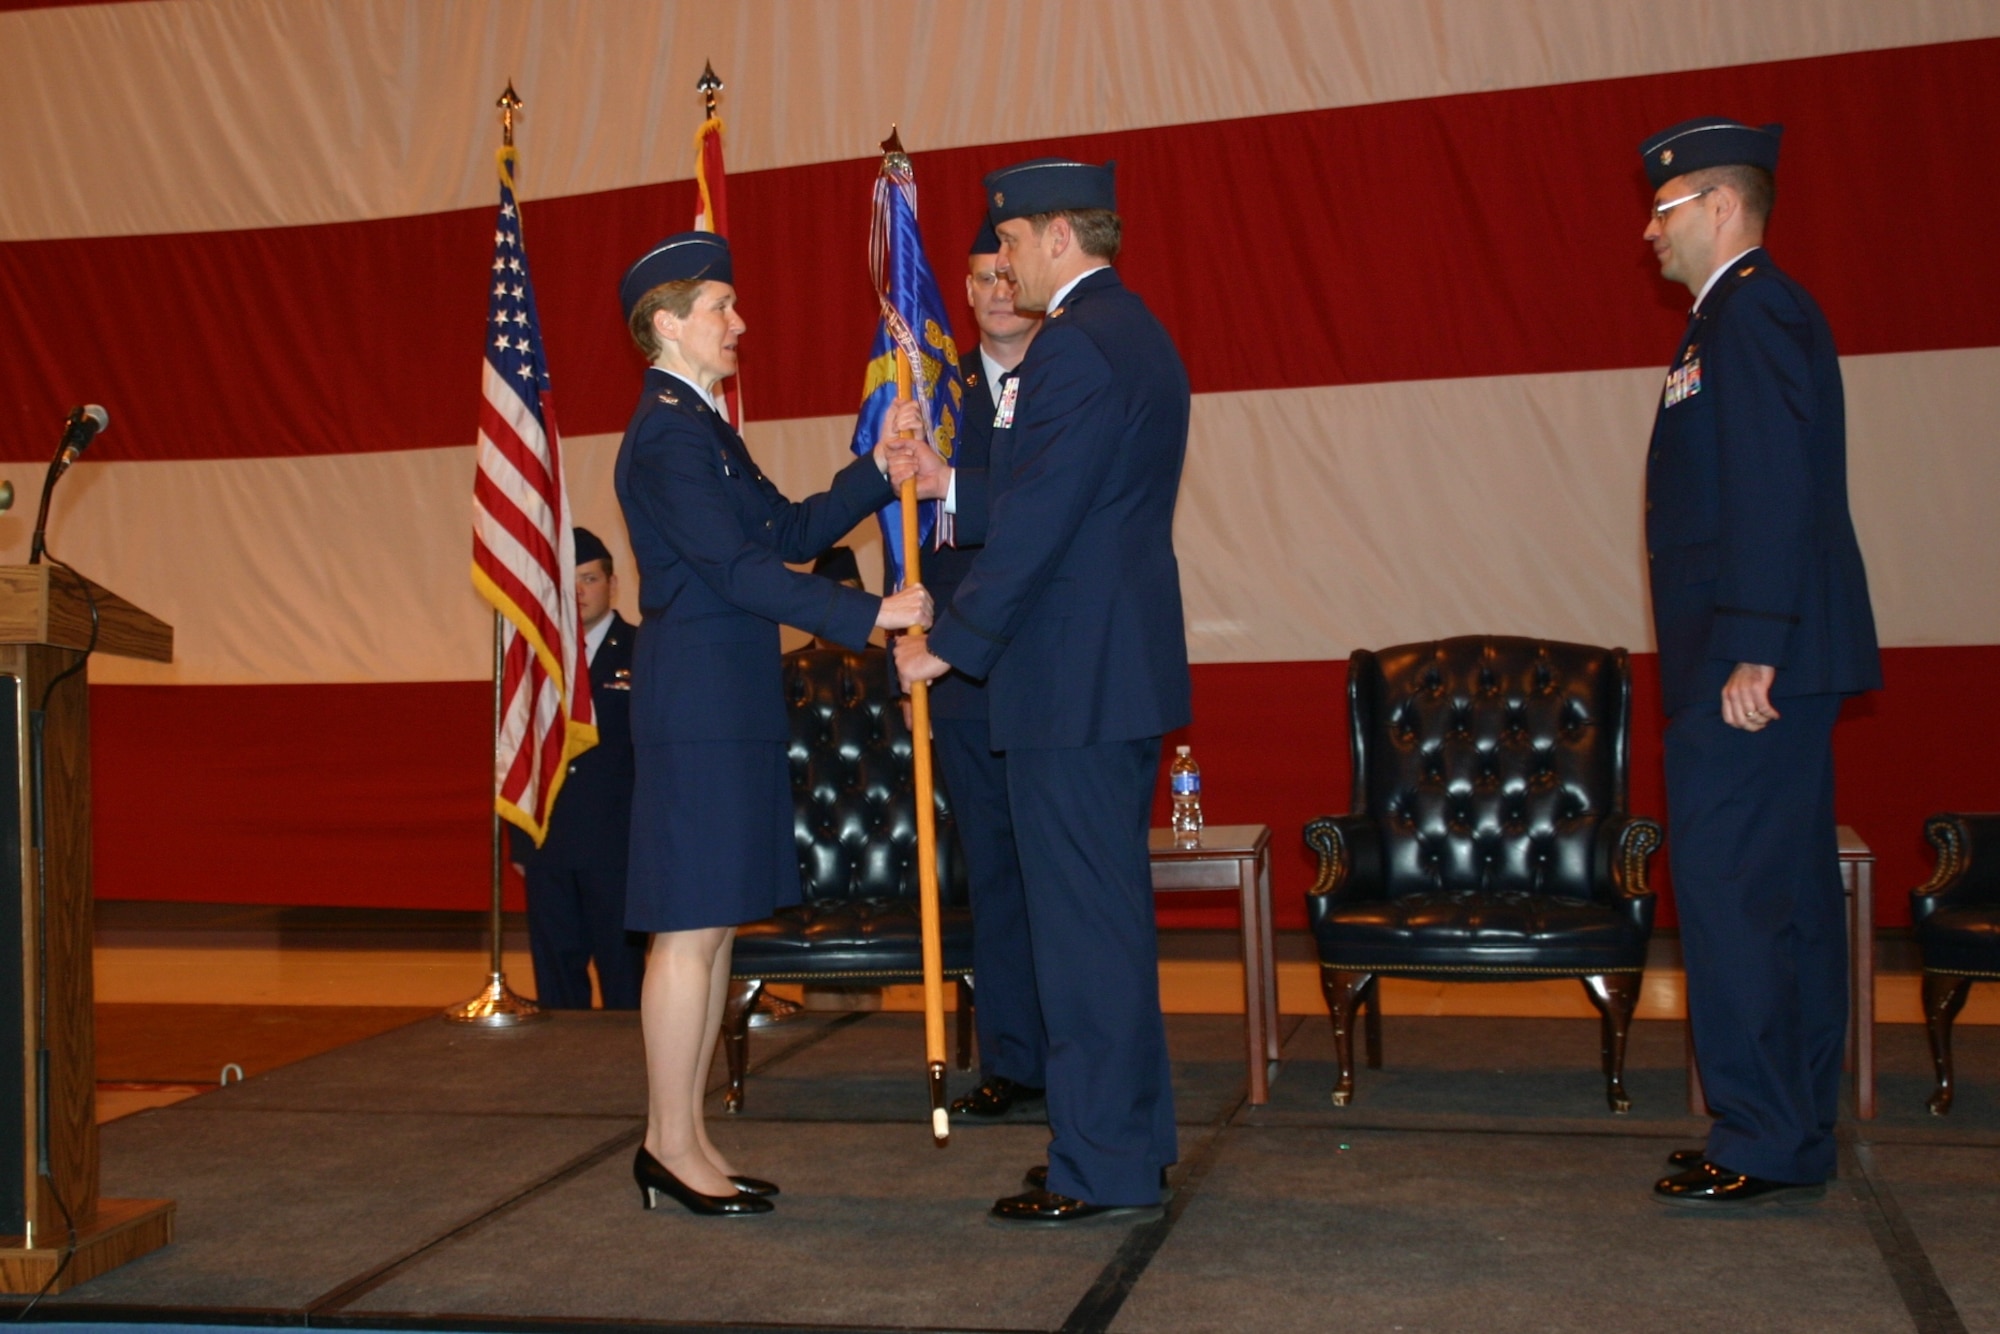 Lieutenant Col. Jimmy Warren assumes command of the 965th Airborne Air Control Squadron March 23 as he receives the ceremonial guide-on from Col. Patricia Hoffman, commander, 552nd Air Control Wing.